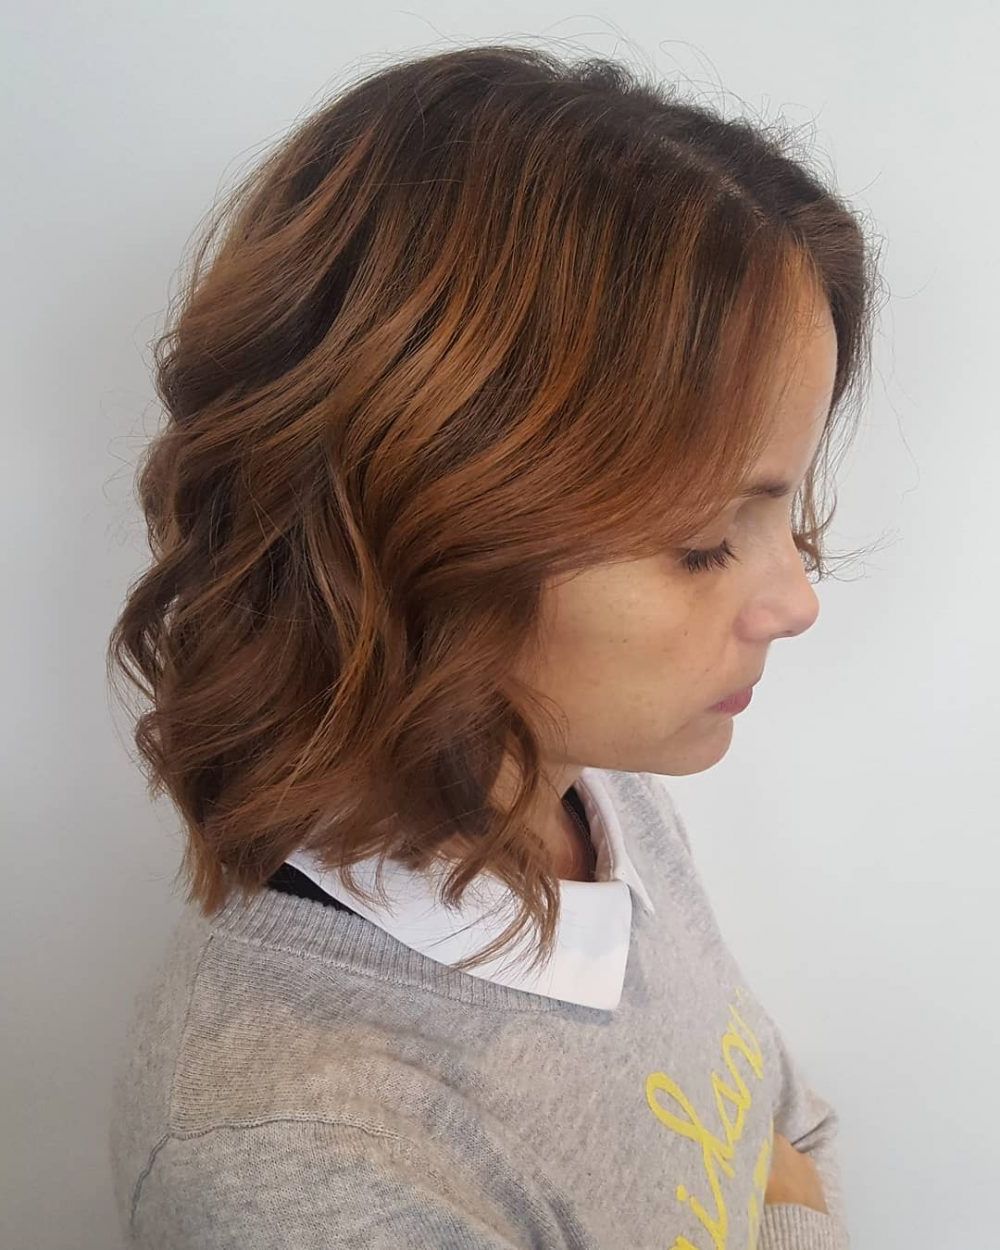 43 Greatest Wavy Bob Hairstyles – Short, Medium And Long In 2018 Pertaining To Nape Length Brown Bob Hairstyles With Messy Curls (Photo 19 of 25)